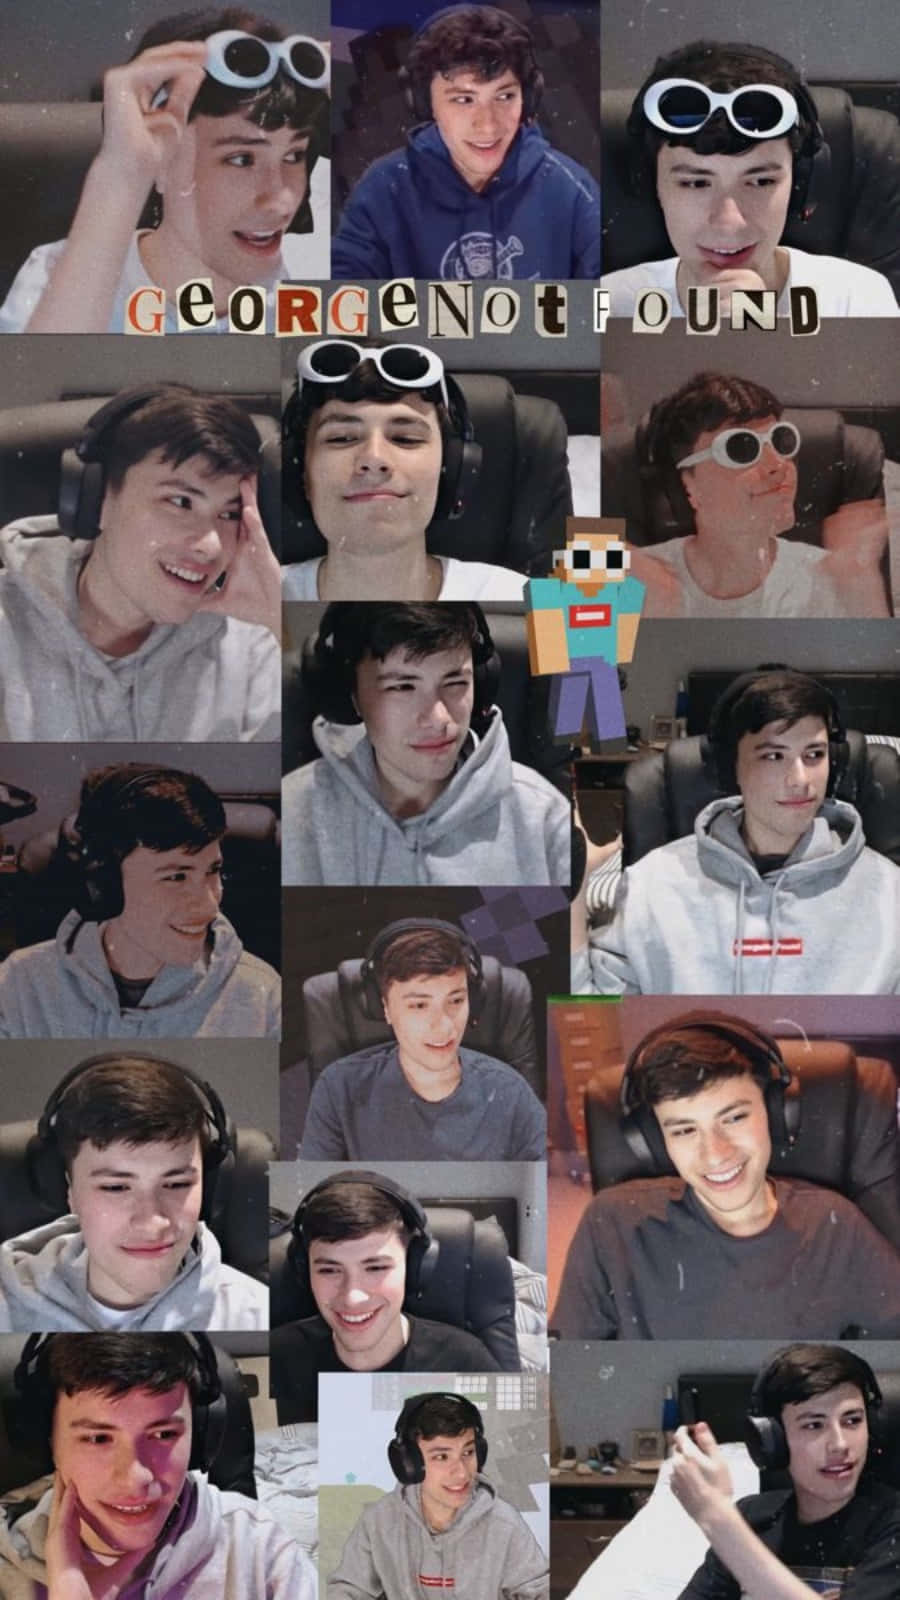 youtuber collage wallpaper